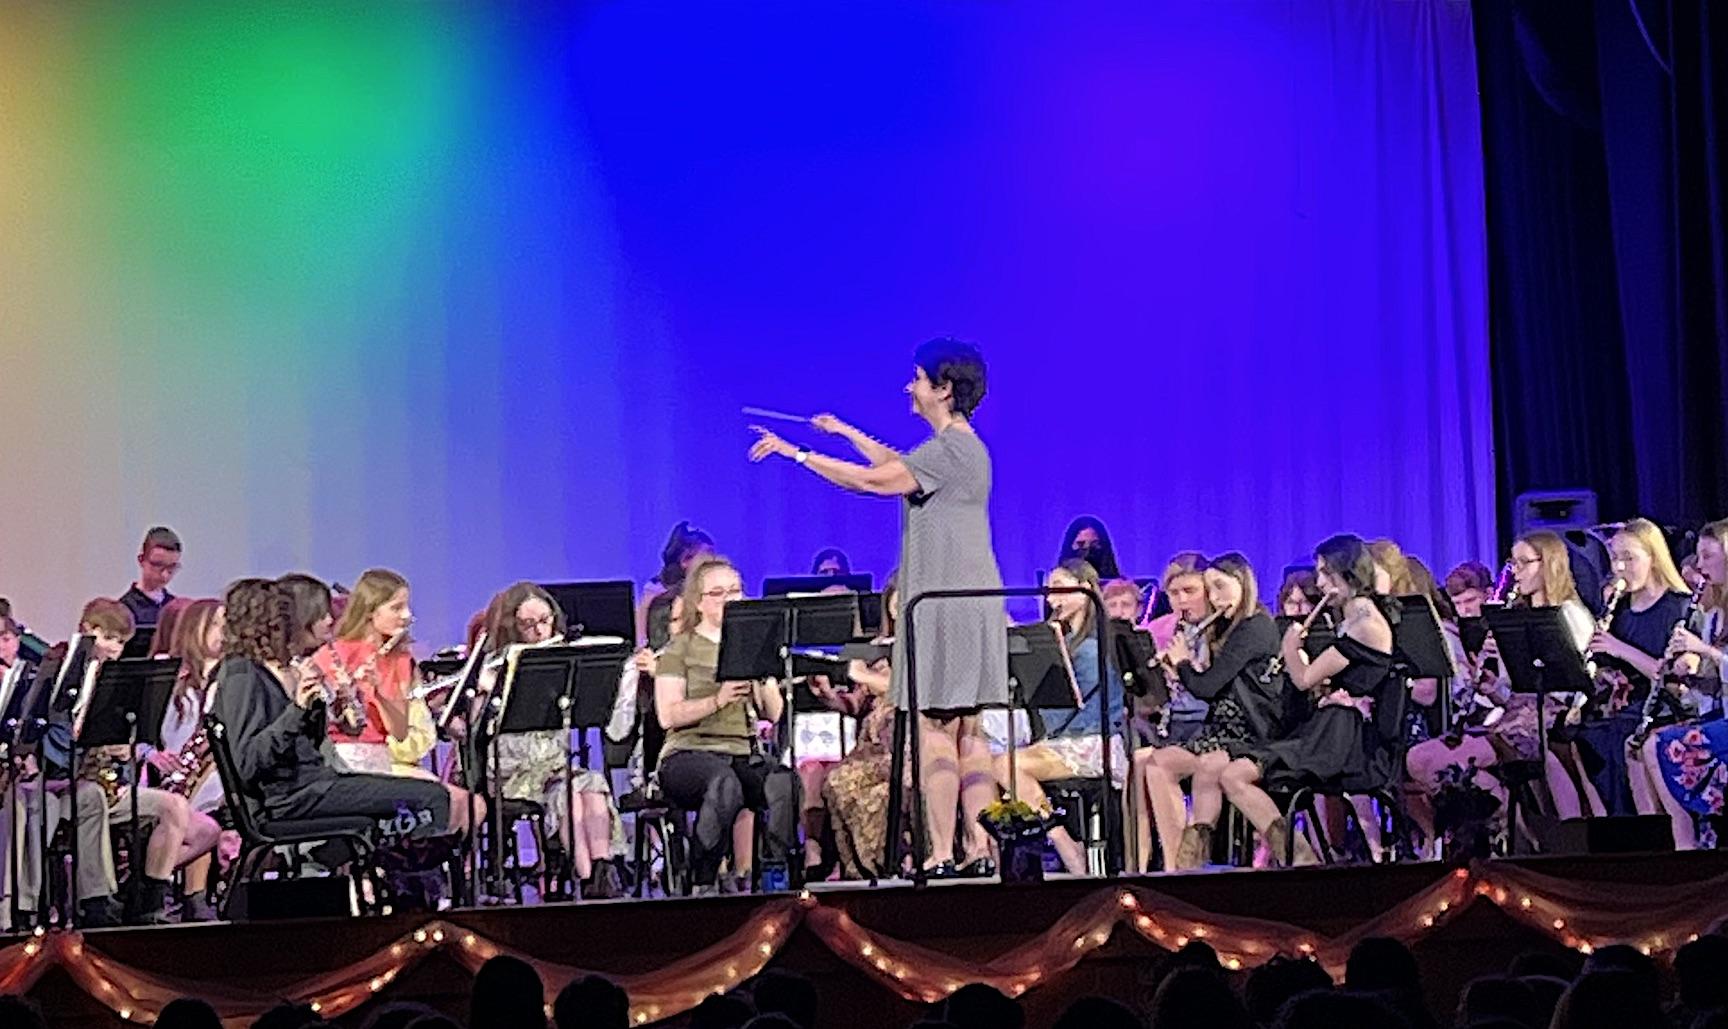 Mrs. Inglese conducts the band in the march “Sousa Times Twosa”, as she prepares to march into a new chapter of life at the end of this school year